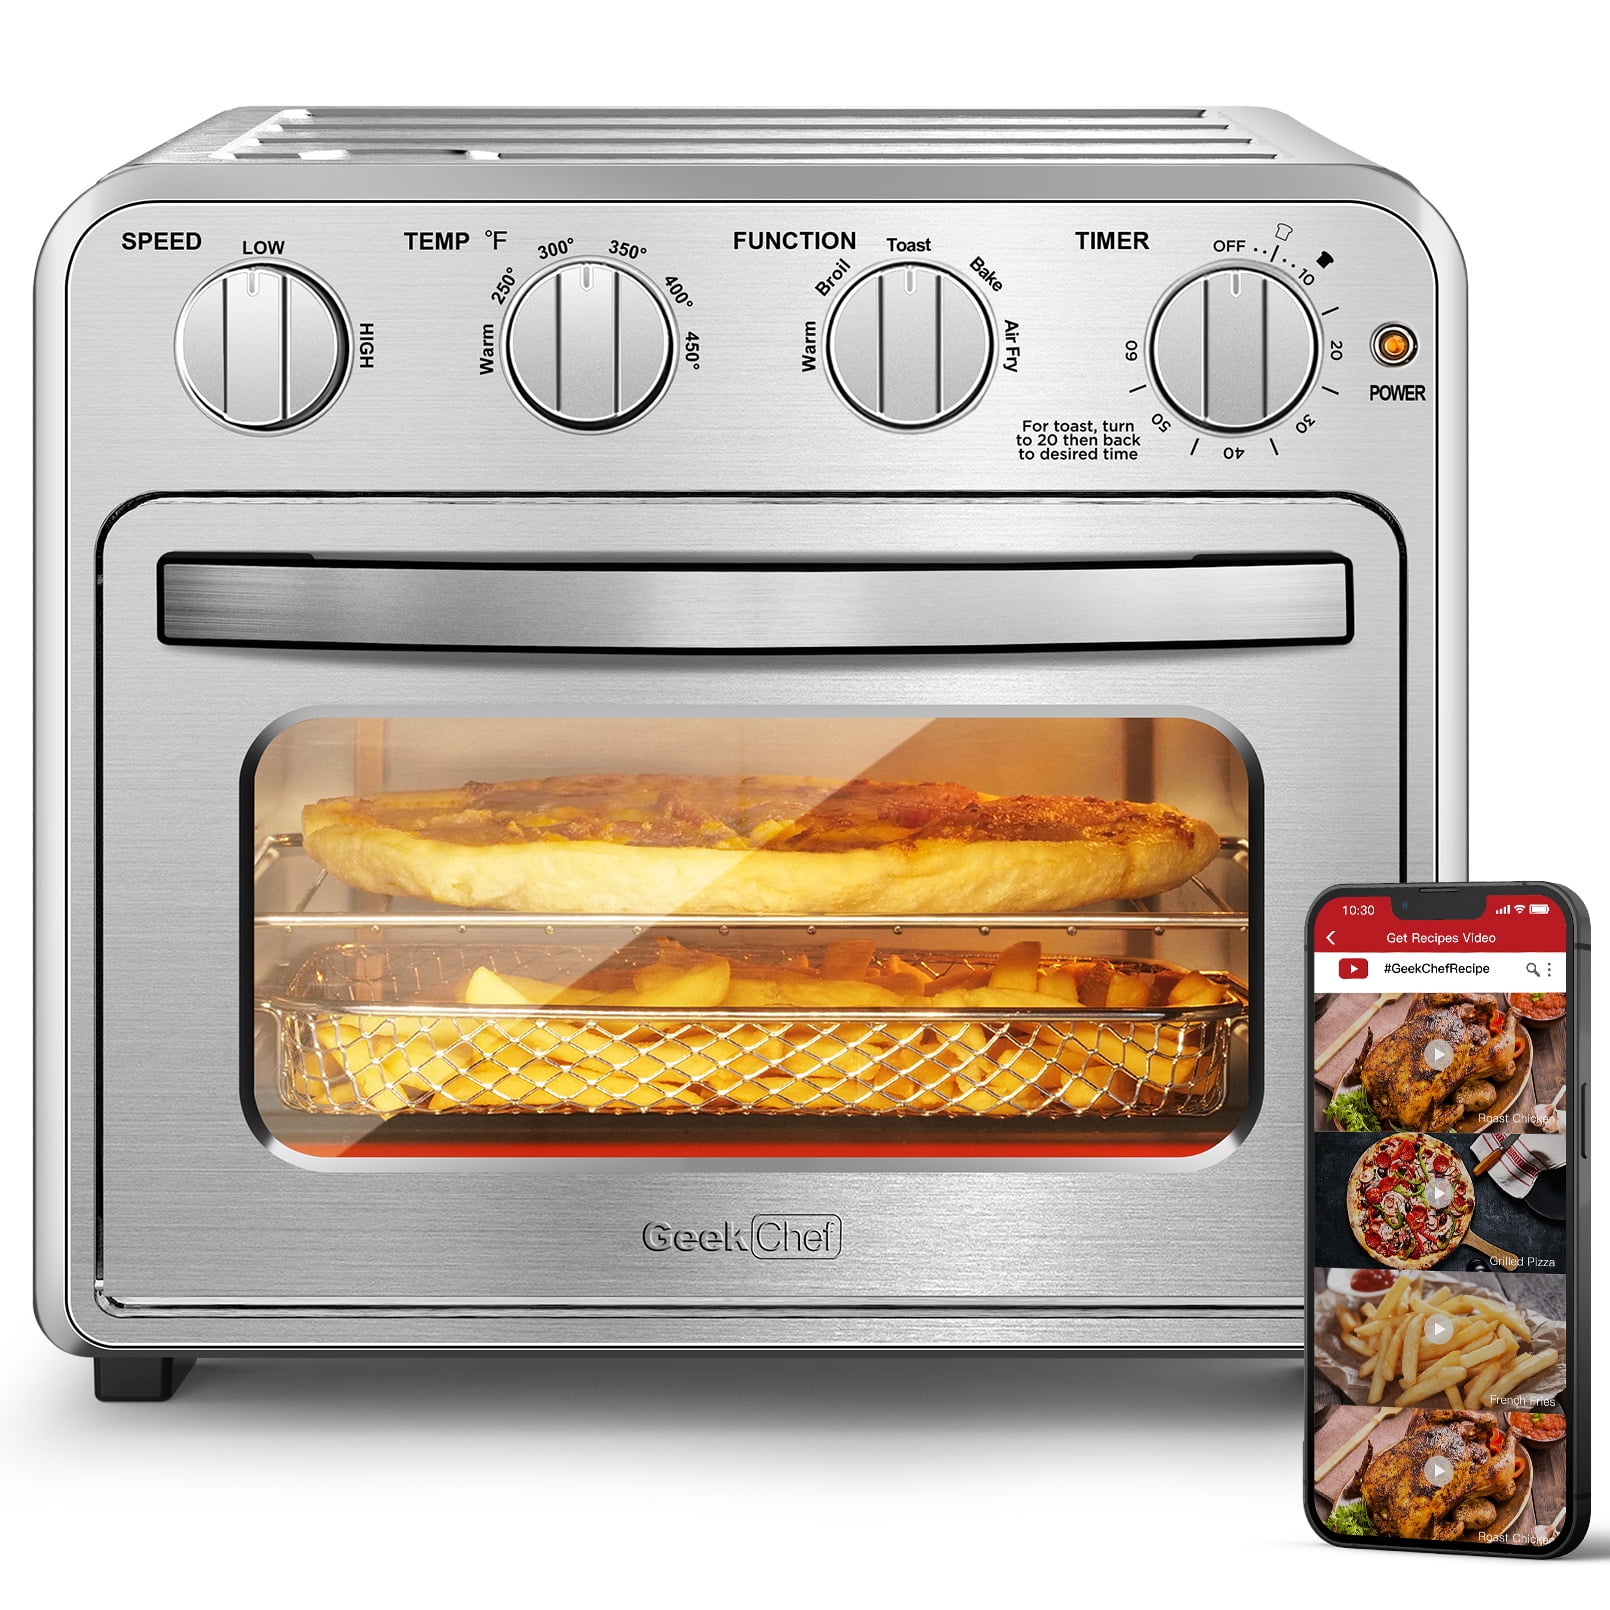 VAL CUCINA 10-in-1 Air Fryer Toaster Oven - Brushed Stainless